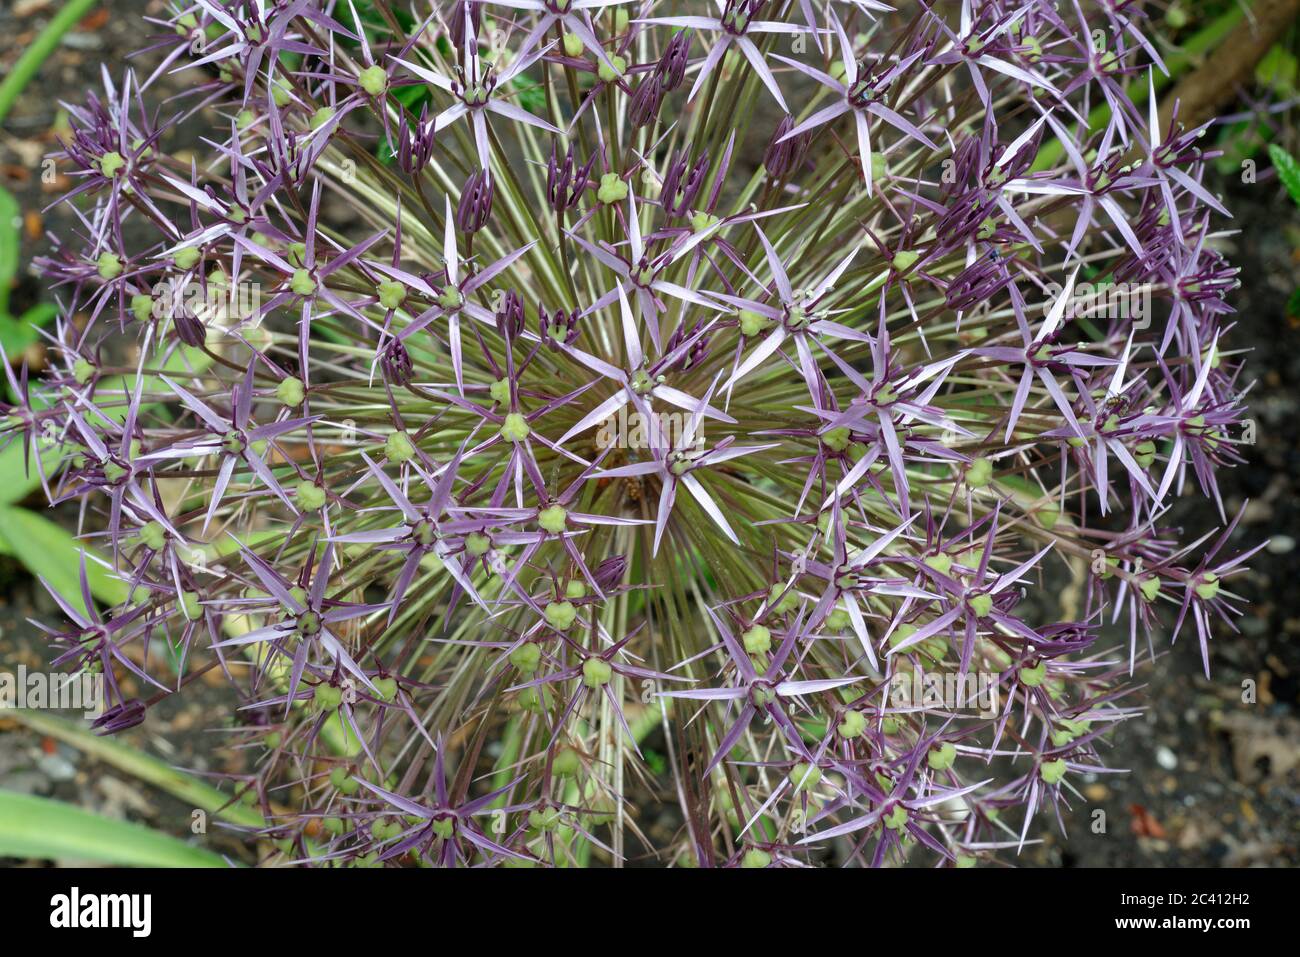 A purple allium flower head in late spring/early summer. Also known as cultivated onion/garlic, it produces a large ornamental flowerhead. Stock Photo